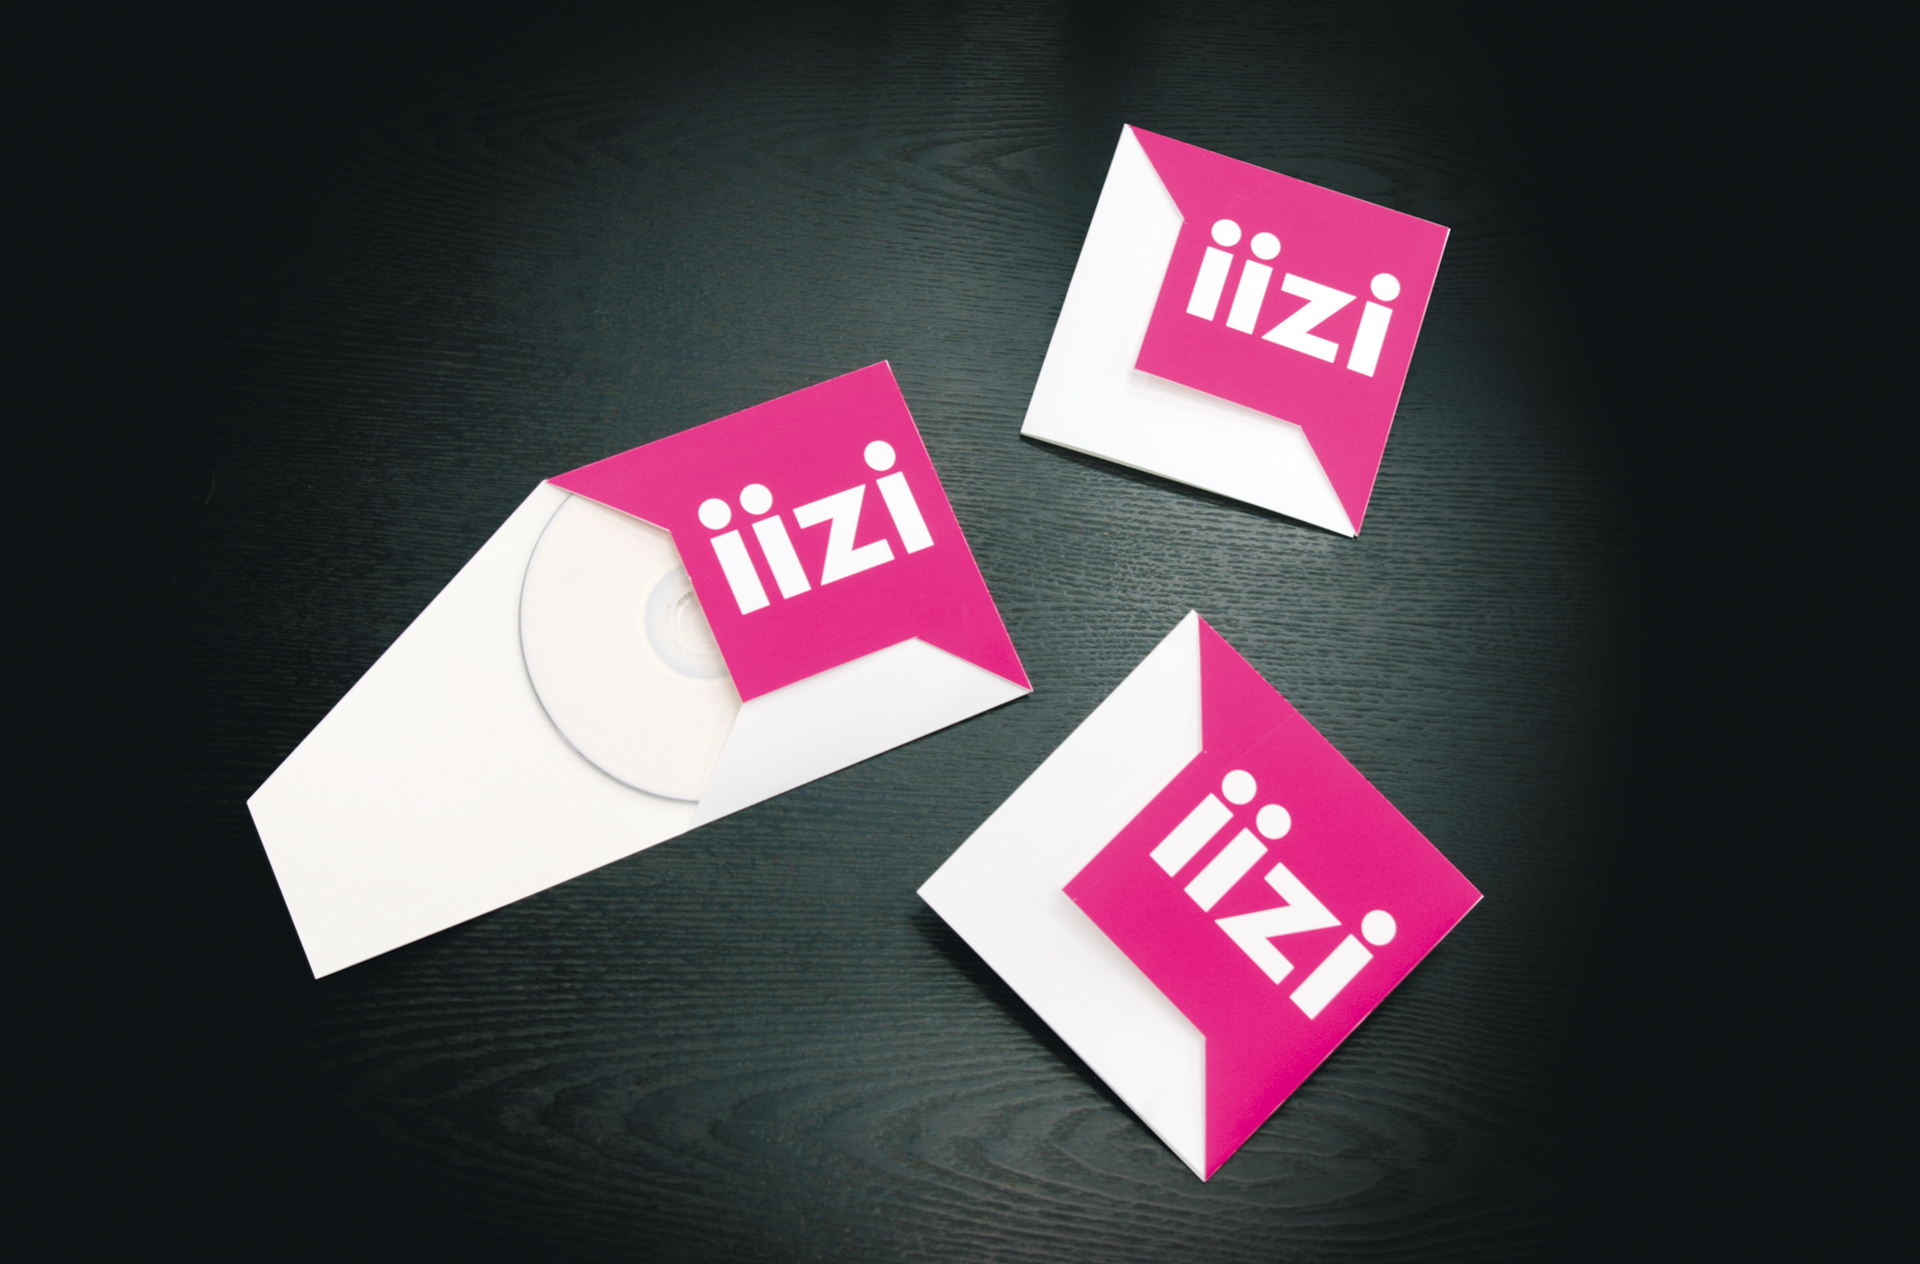 Iizi project involved a new visual look and concept in order to create a new innovative insurance broker, operating on a digital platform.